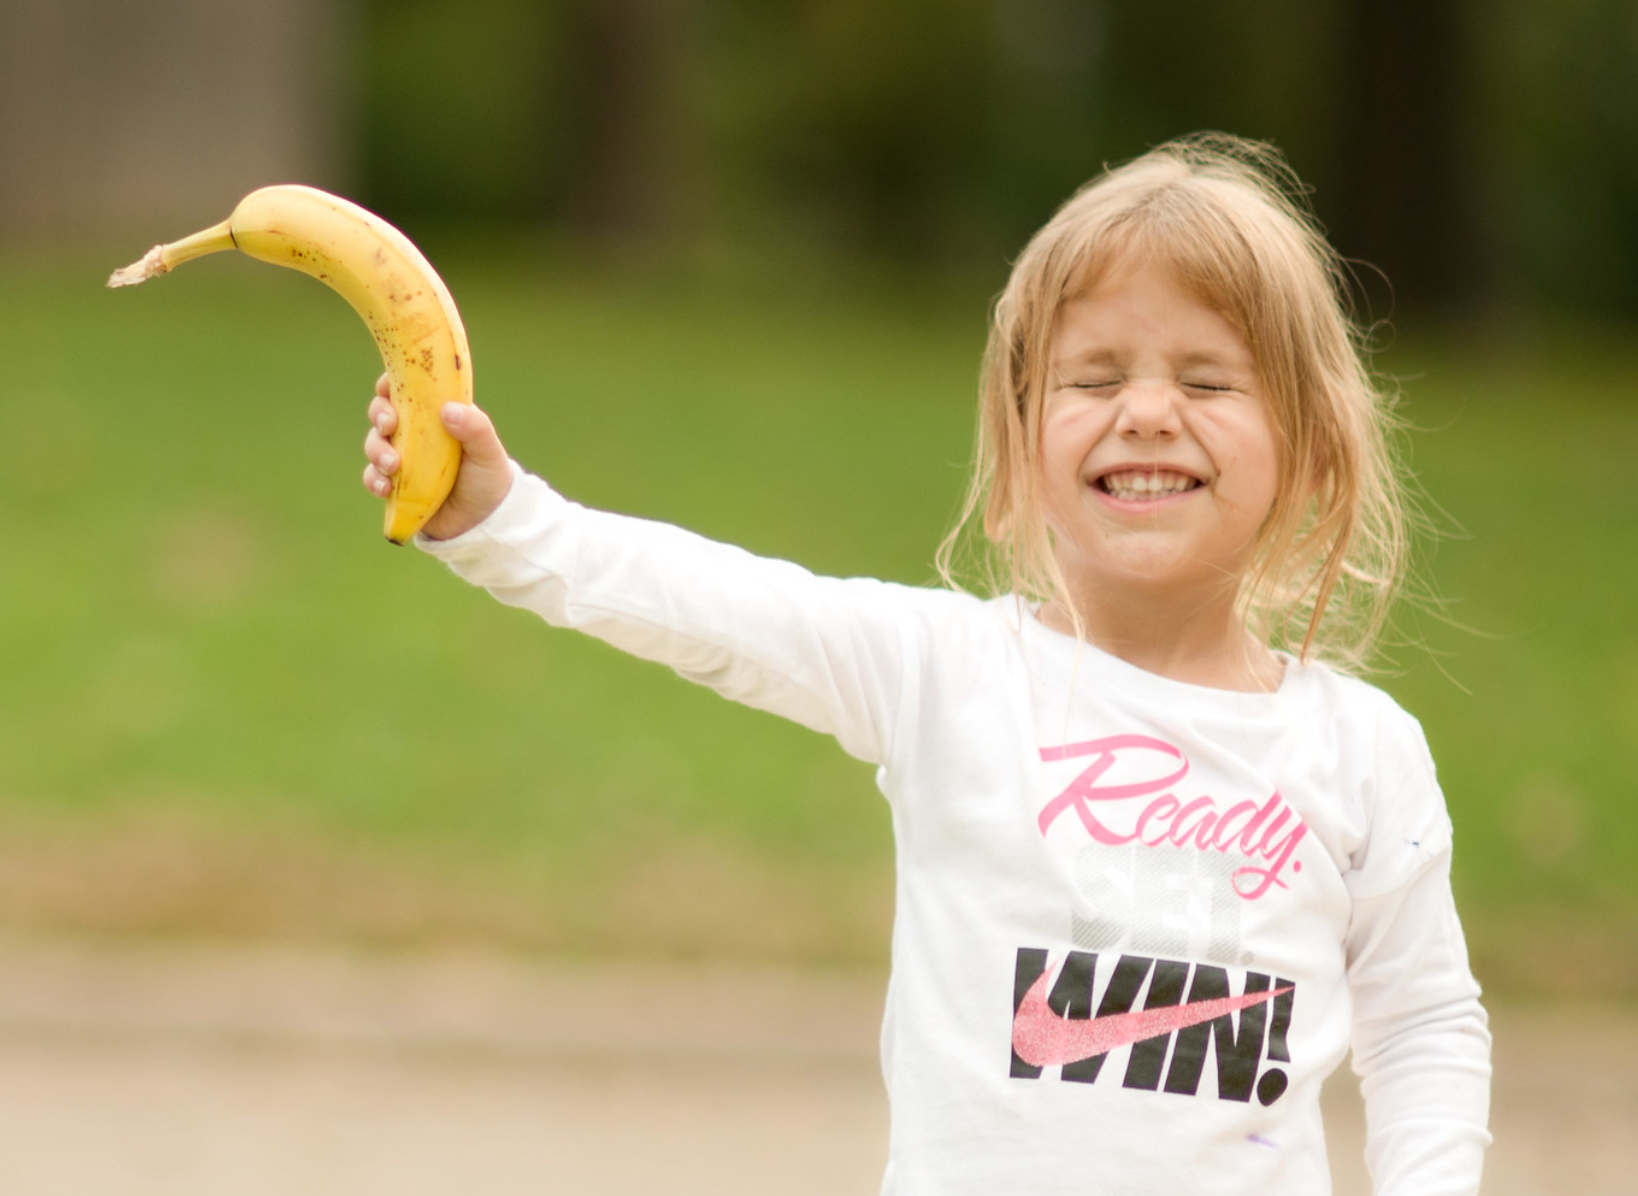 Reese and Her Banana credit Donnie Ray Jones CC BY 20